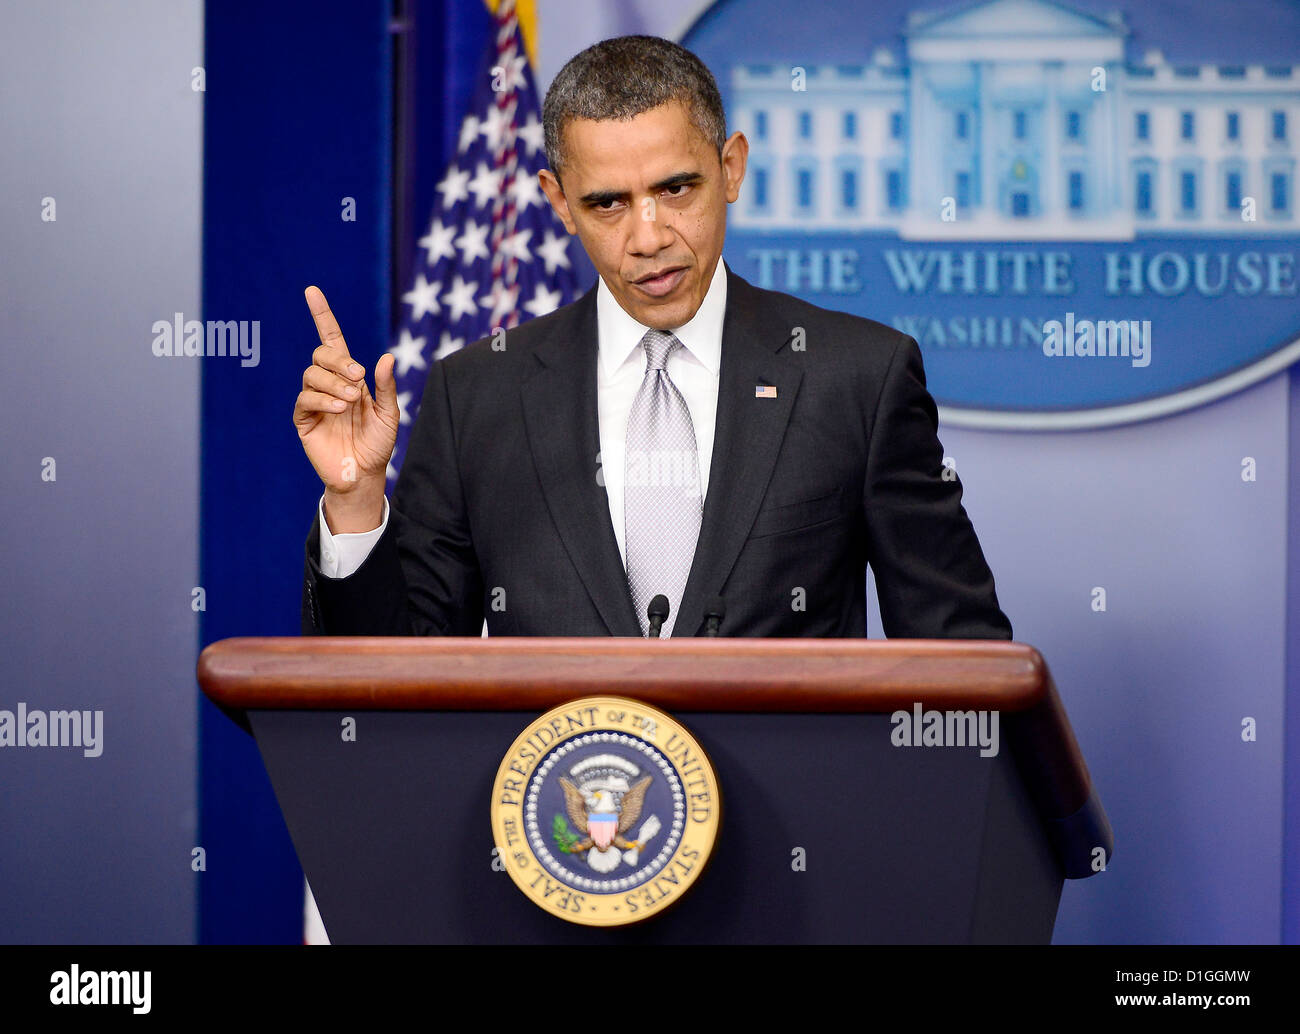 United States President Barack Obama answers reporter's questions after making a statement about how his administration will pursue a Weapons control policy in the wake of the Newtown tragedy in the Brady Press Briefing Room on Wednesday, December 19, 2012. .Credit: Ron Sachs / CNP Stock Photo